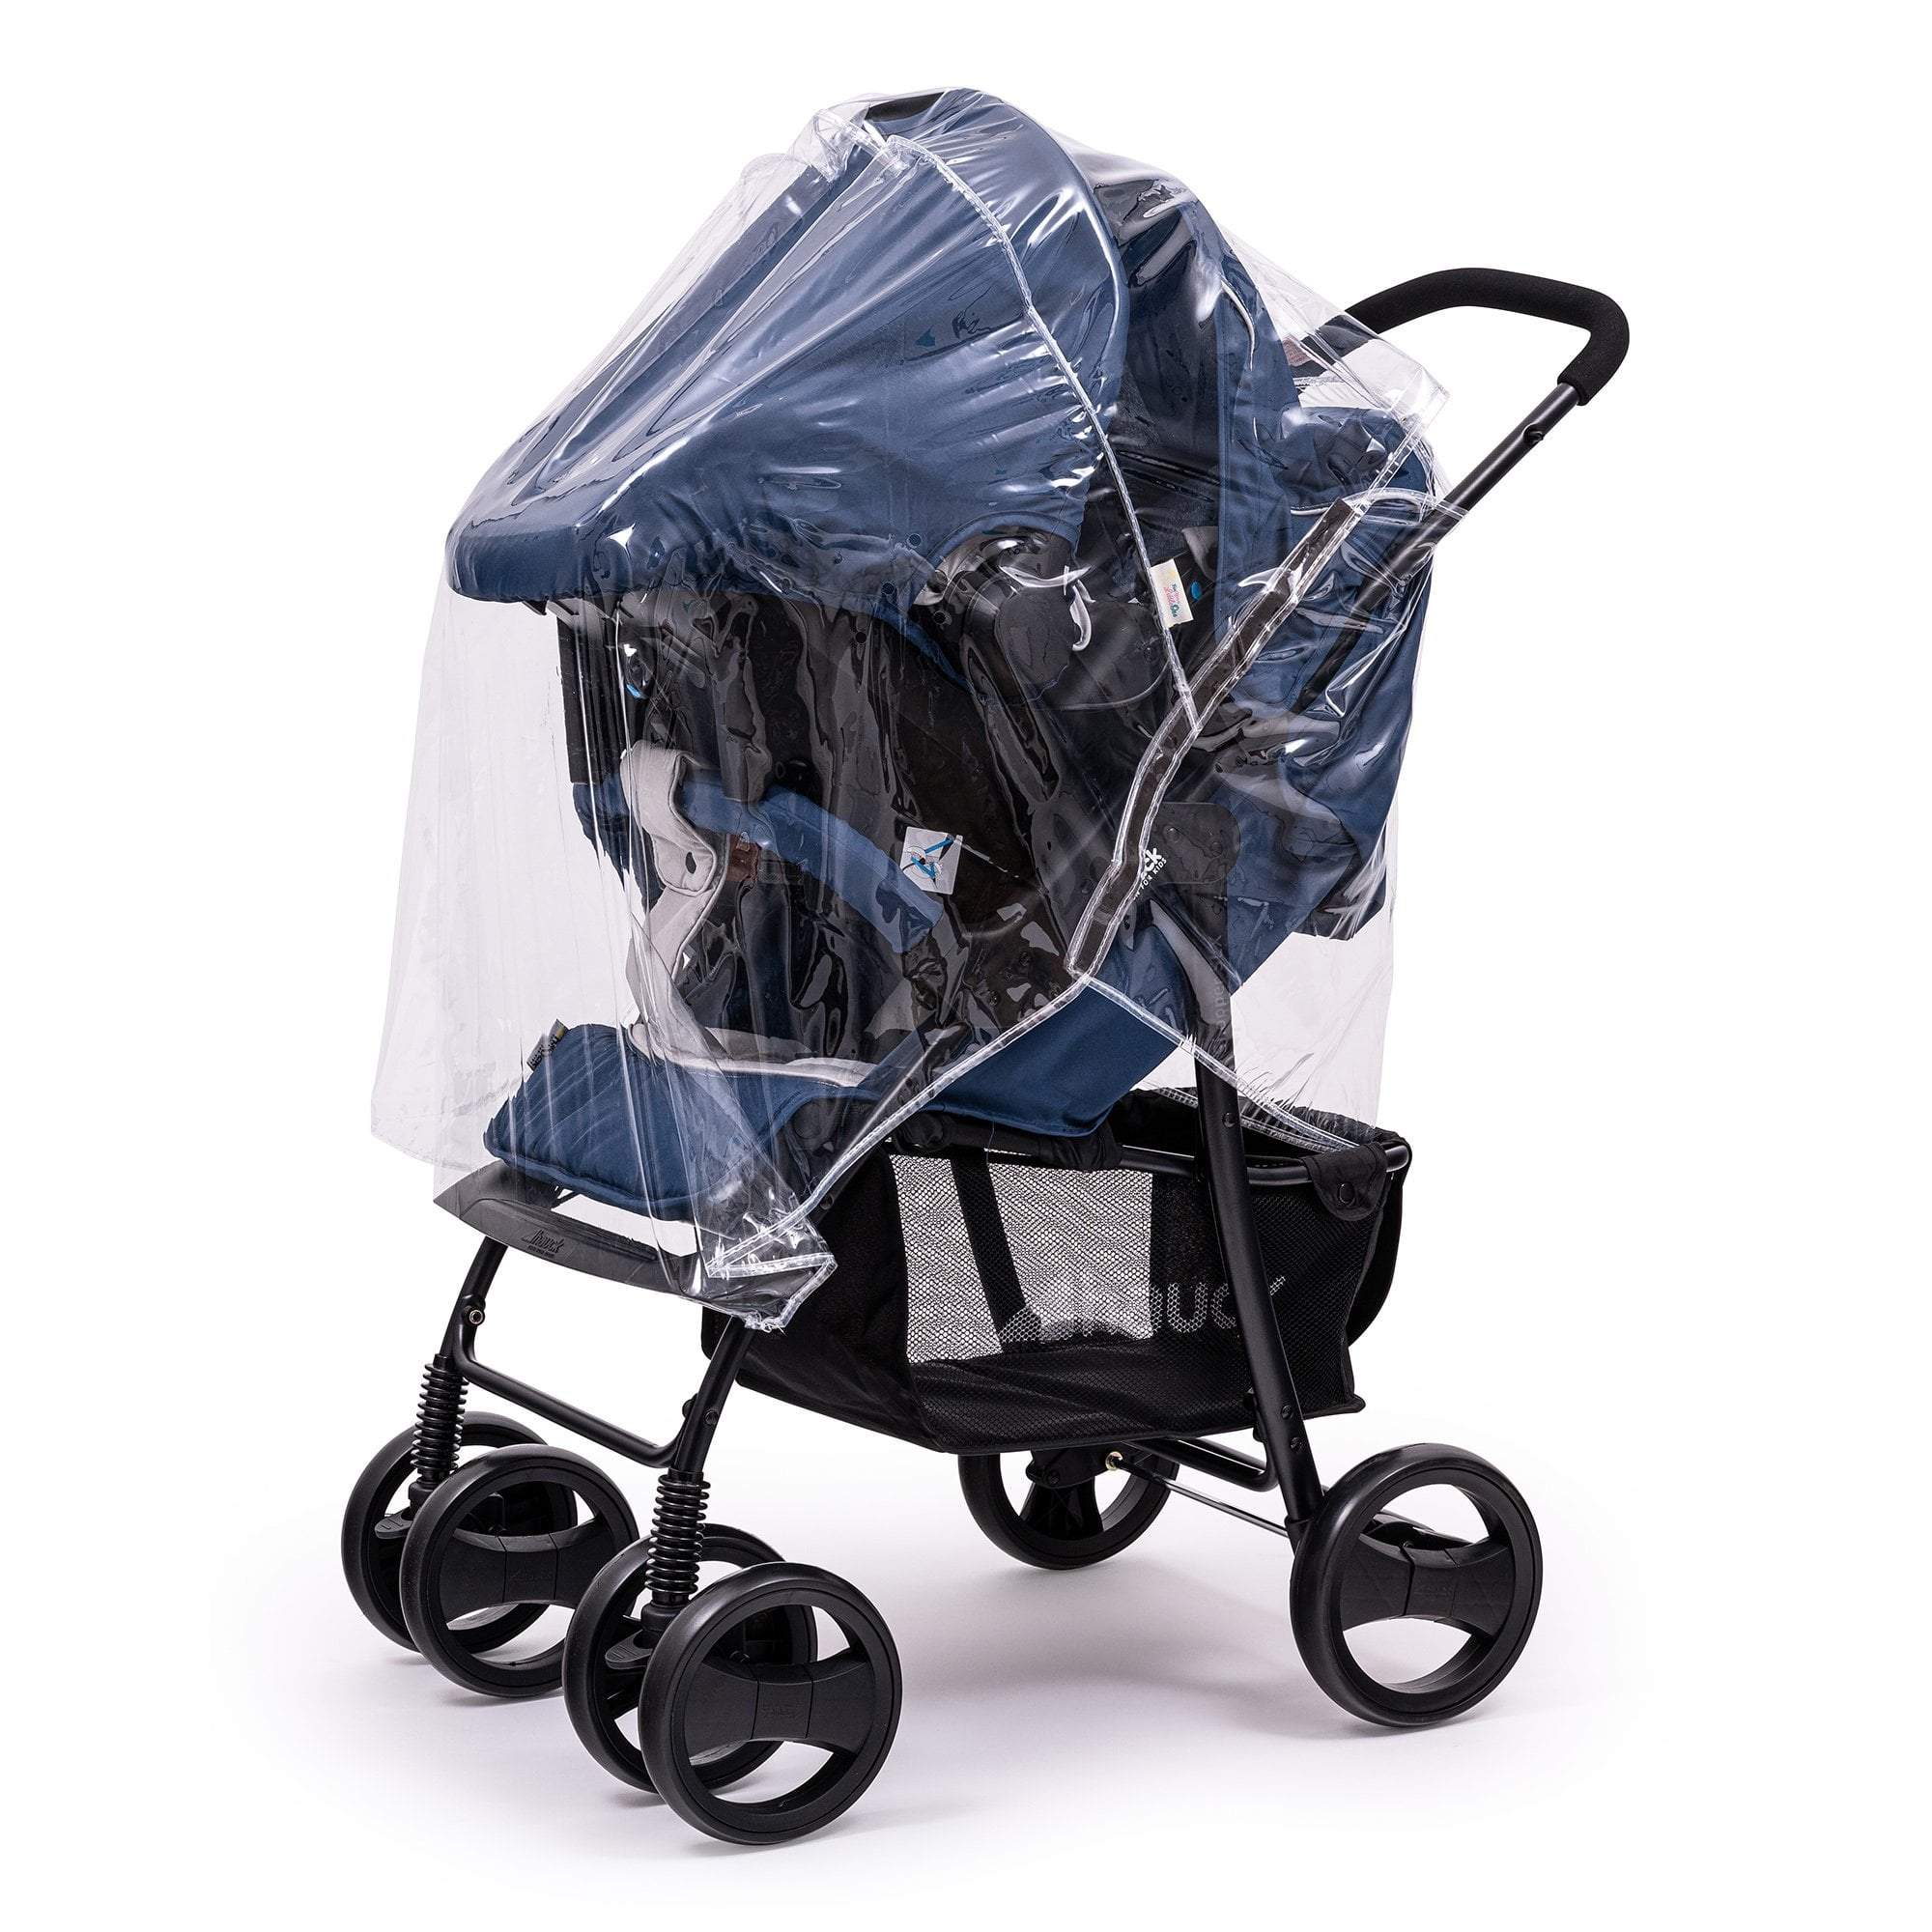 Travel System Raincover Compatible with Britax - Fits All Models - For Your Little One